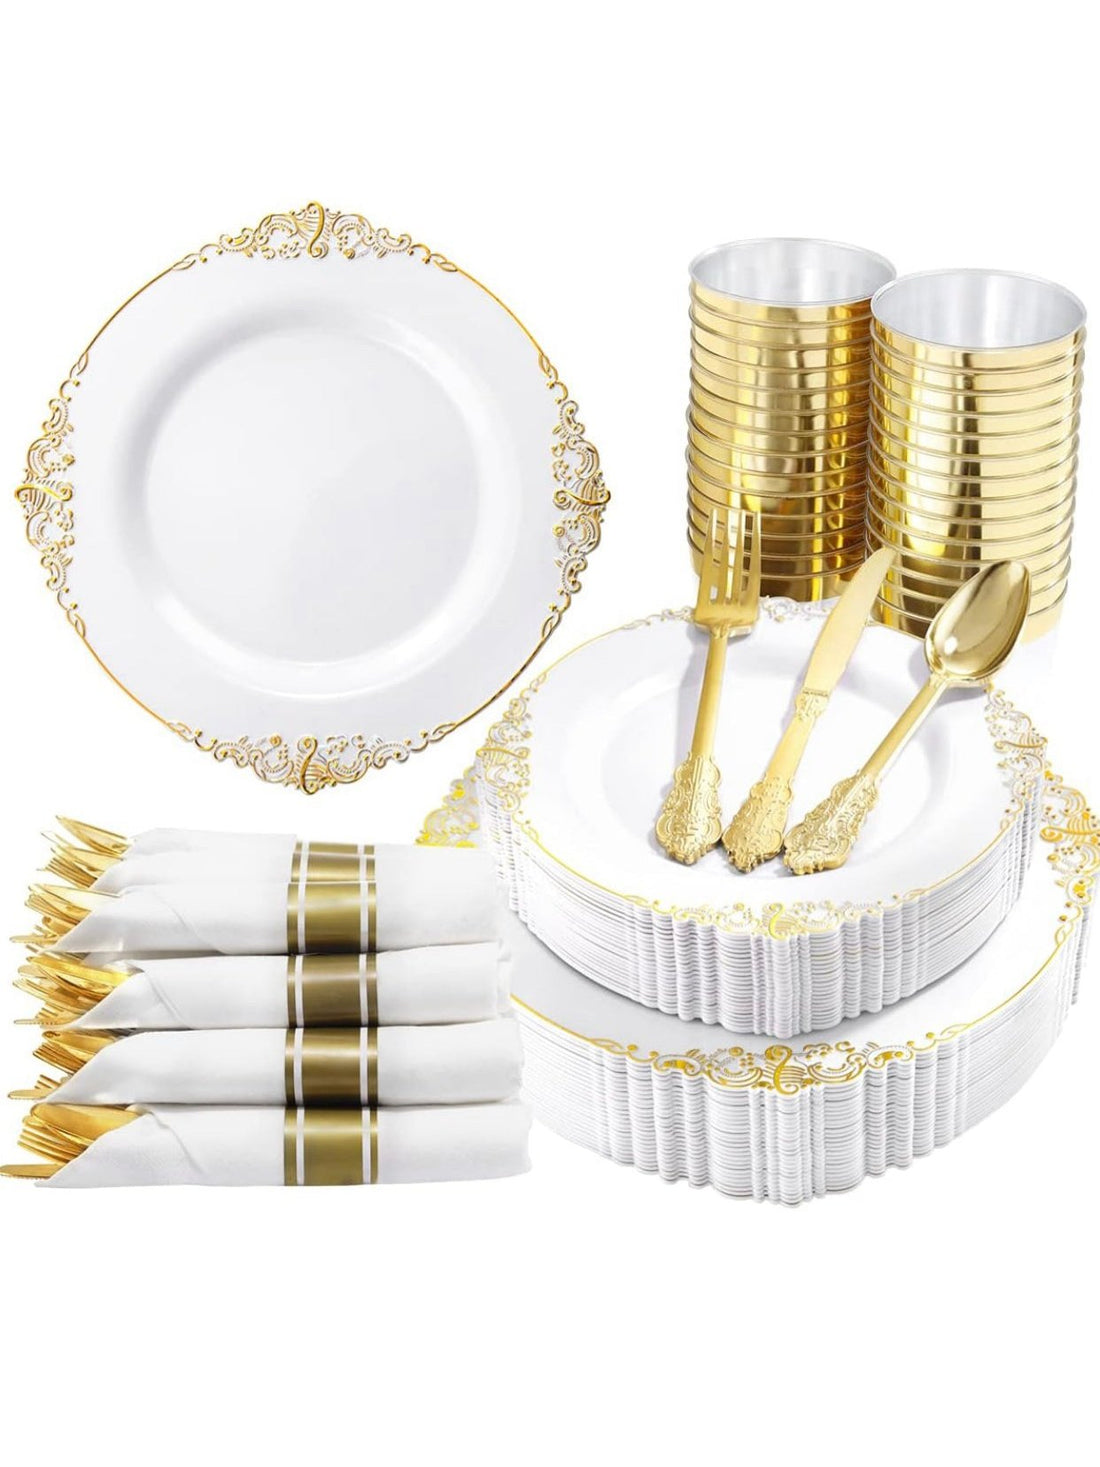 Nervure 350PCS Gold Plastic Plates - Disposable Dinnerware Plates and Pre Rolled Napkins with Plastic Cutlery for 50 Guests, 100Plates, 150Silverware, 50Cups, 50Napkins for Wedding&Party Heavyweight